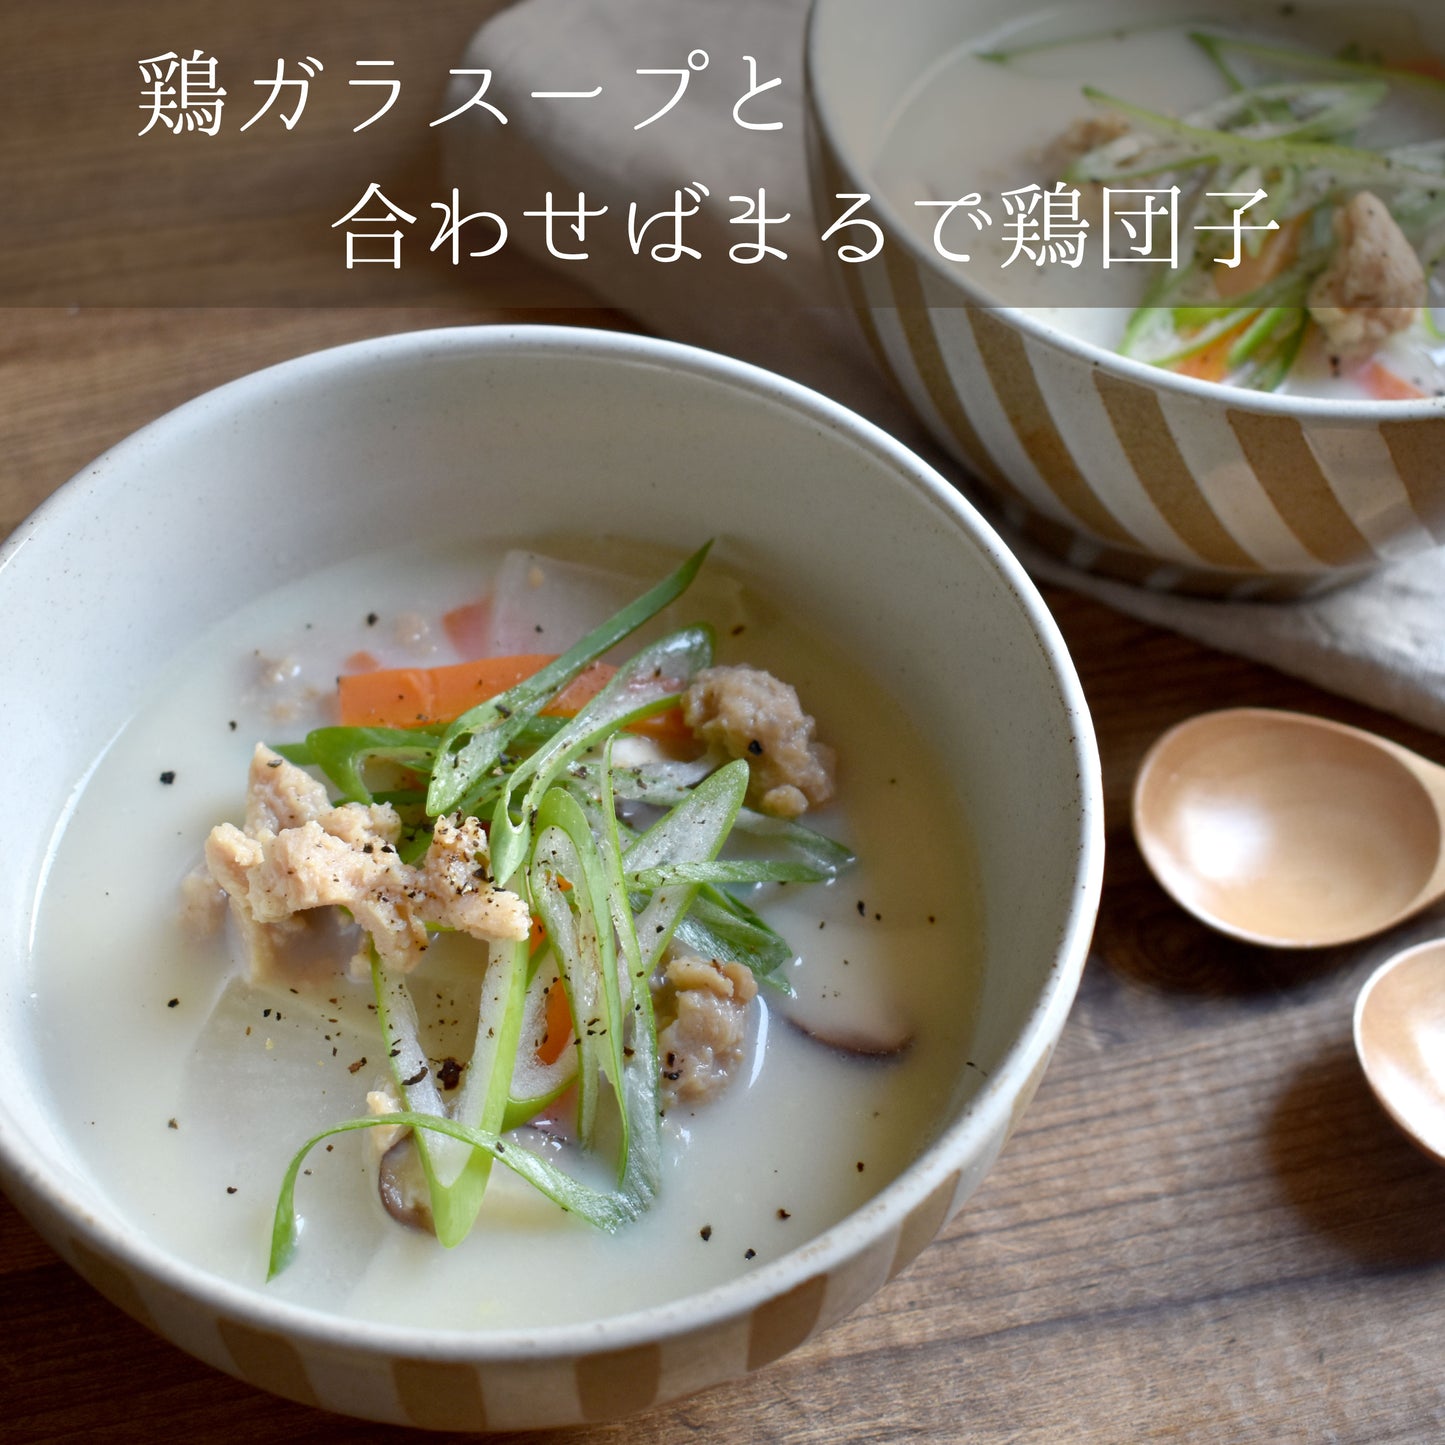 SOY BEAN PROTEIN 大豆ミートボール（120g）